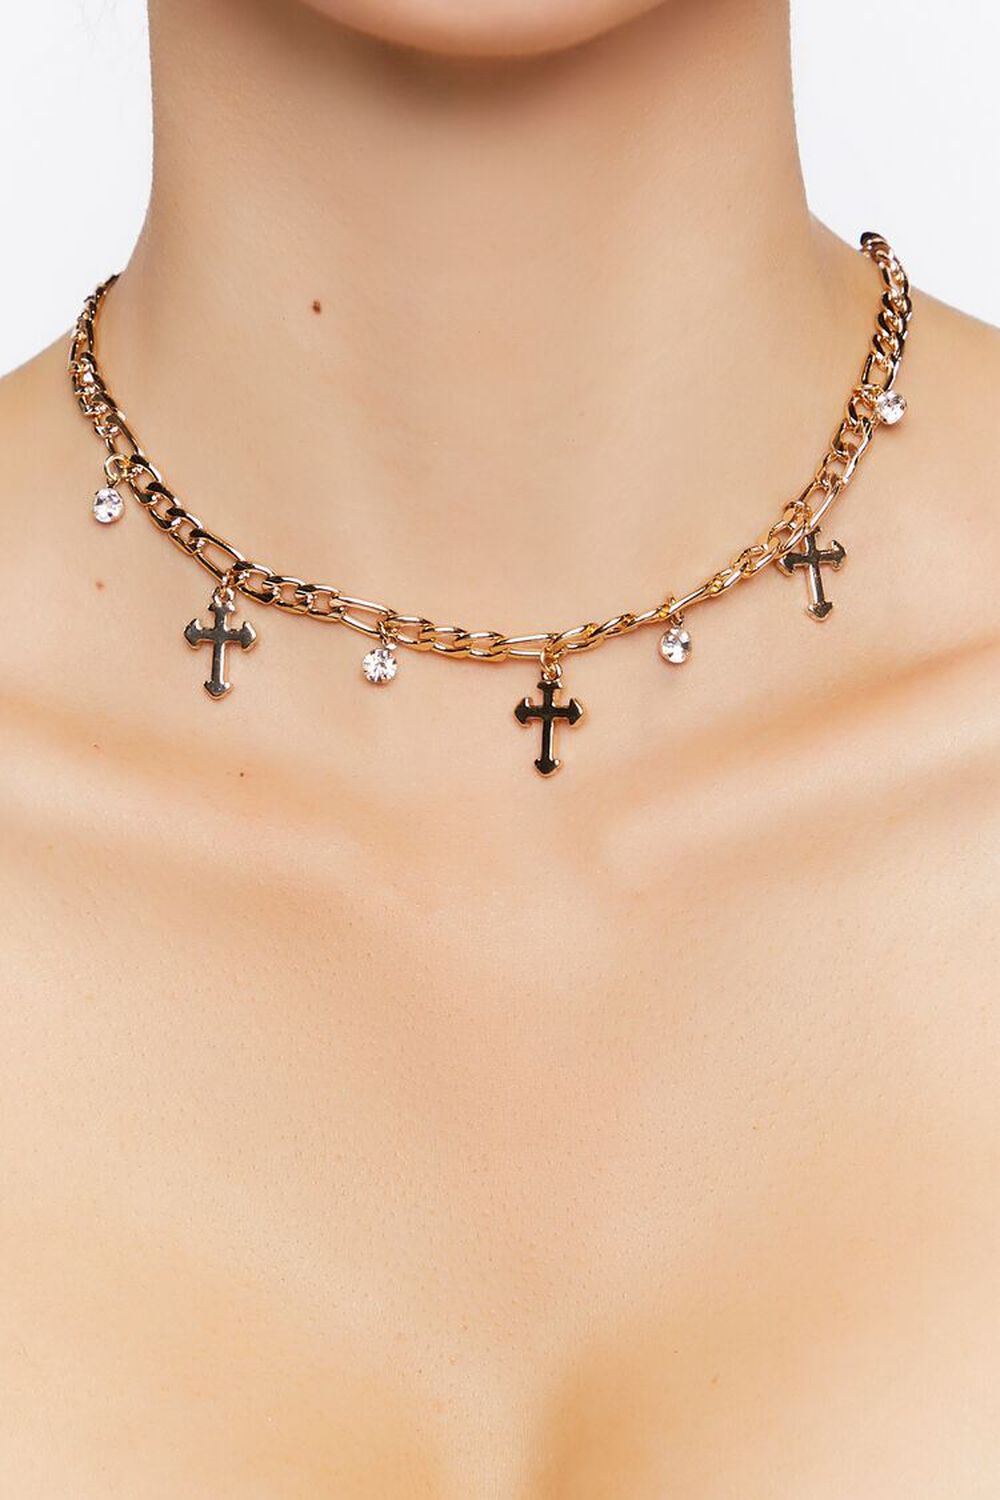 GOLD Figaro Chain Cross Charm Necklace, image 1